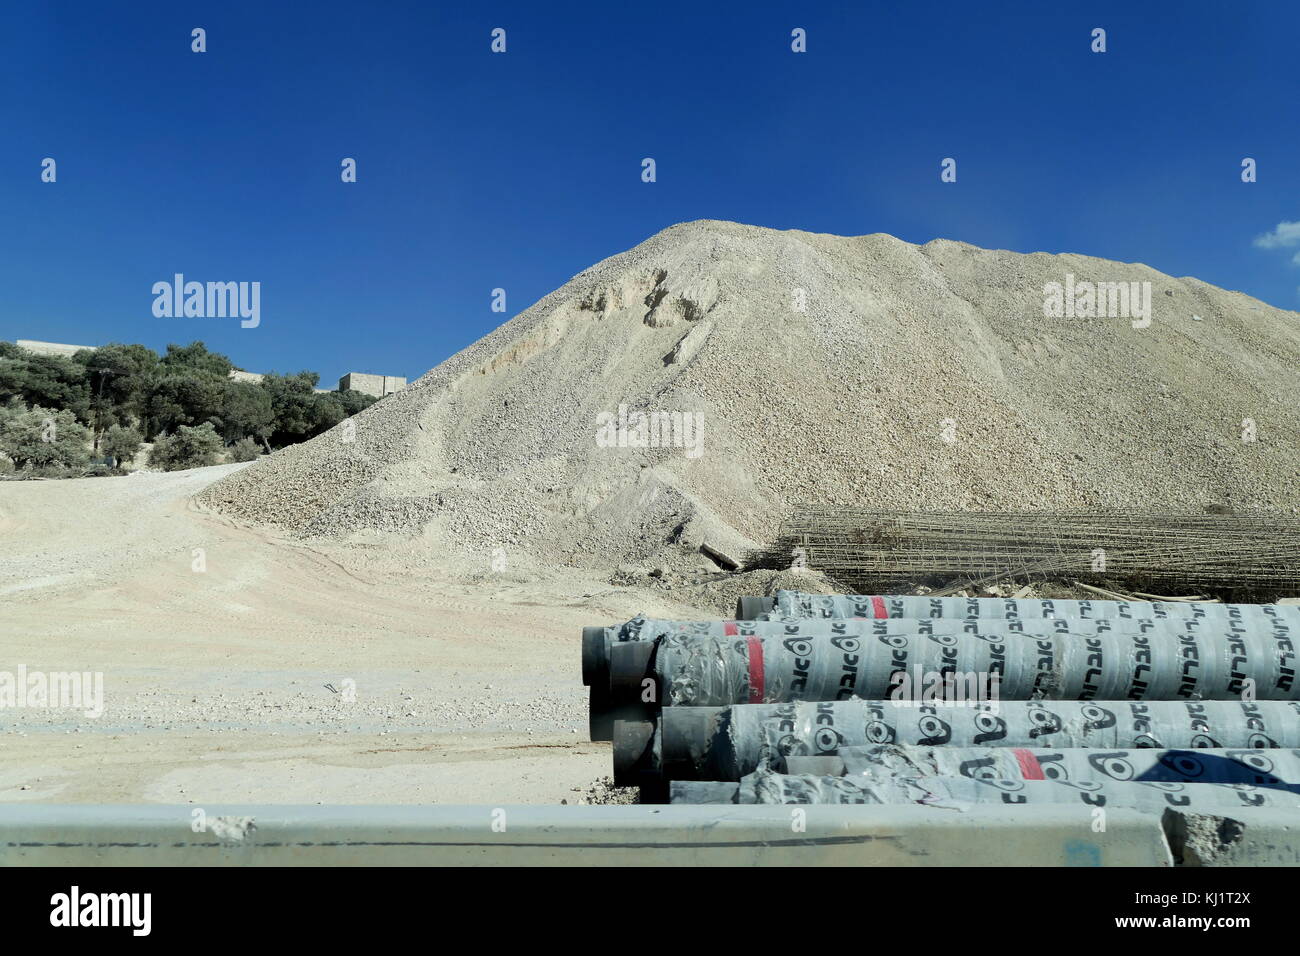 Arab stone quarry, in the Occupied Palestinian, West Bank around Jerusalem. Stock Photo